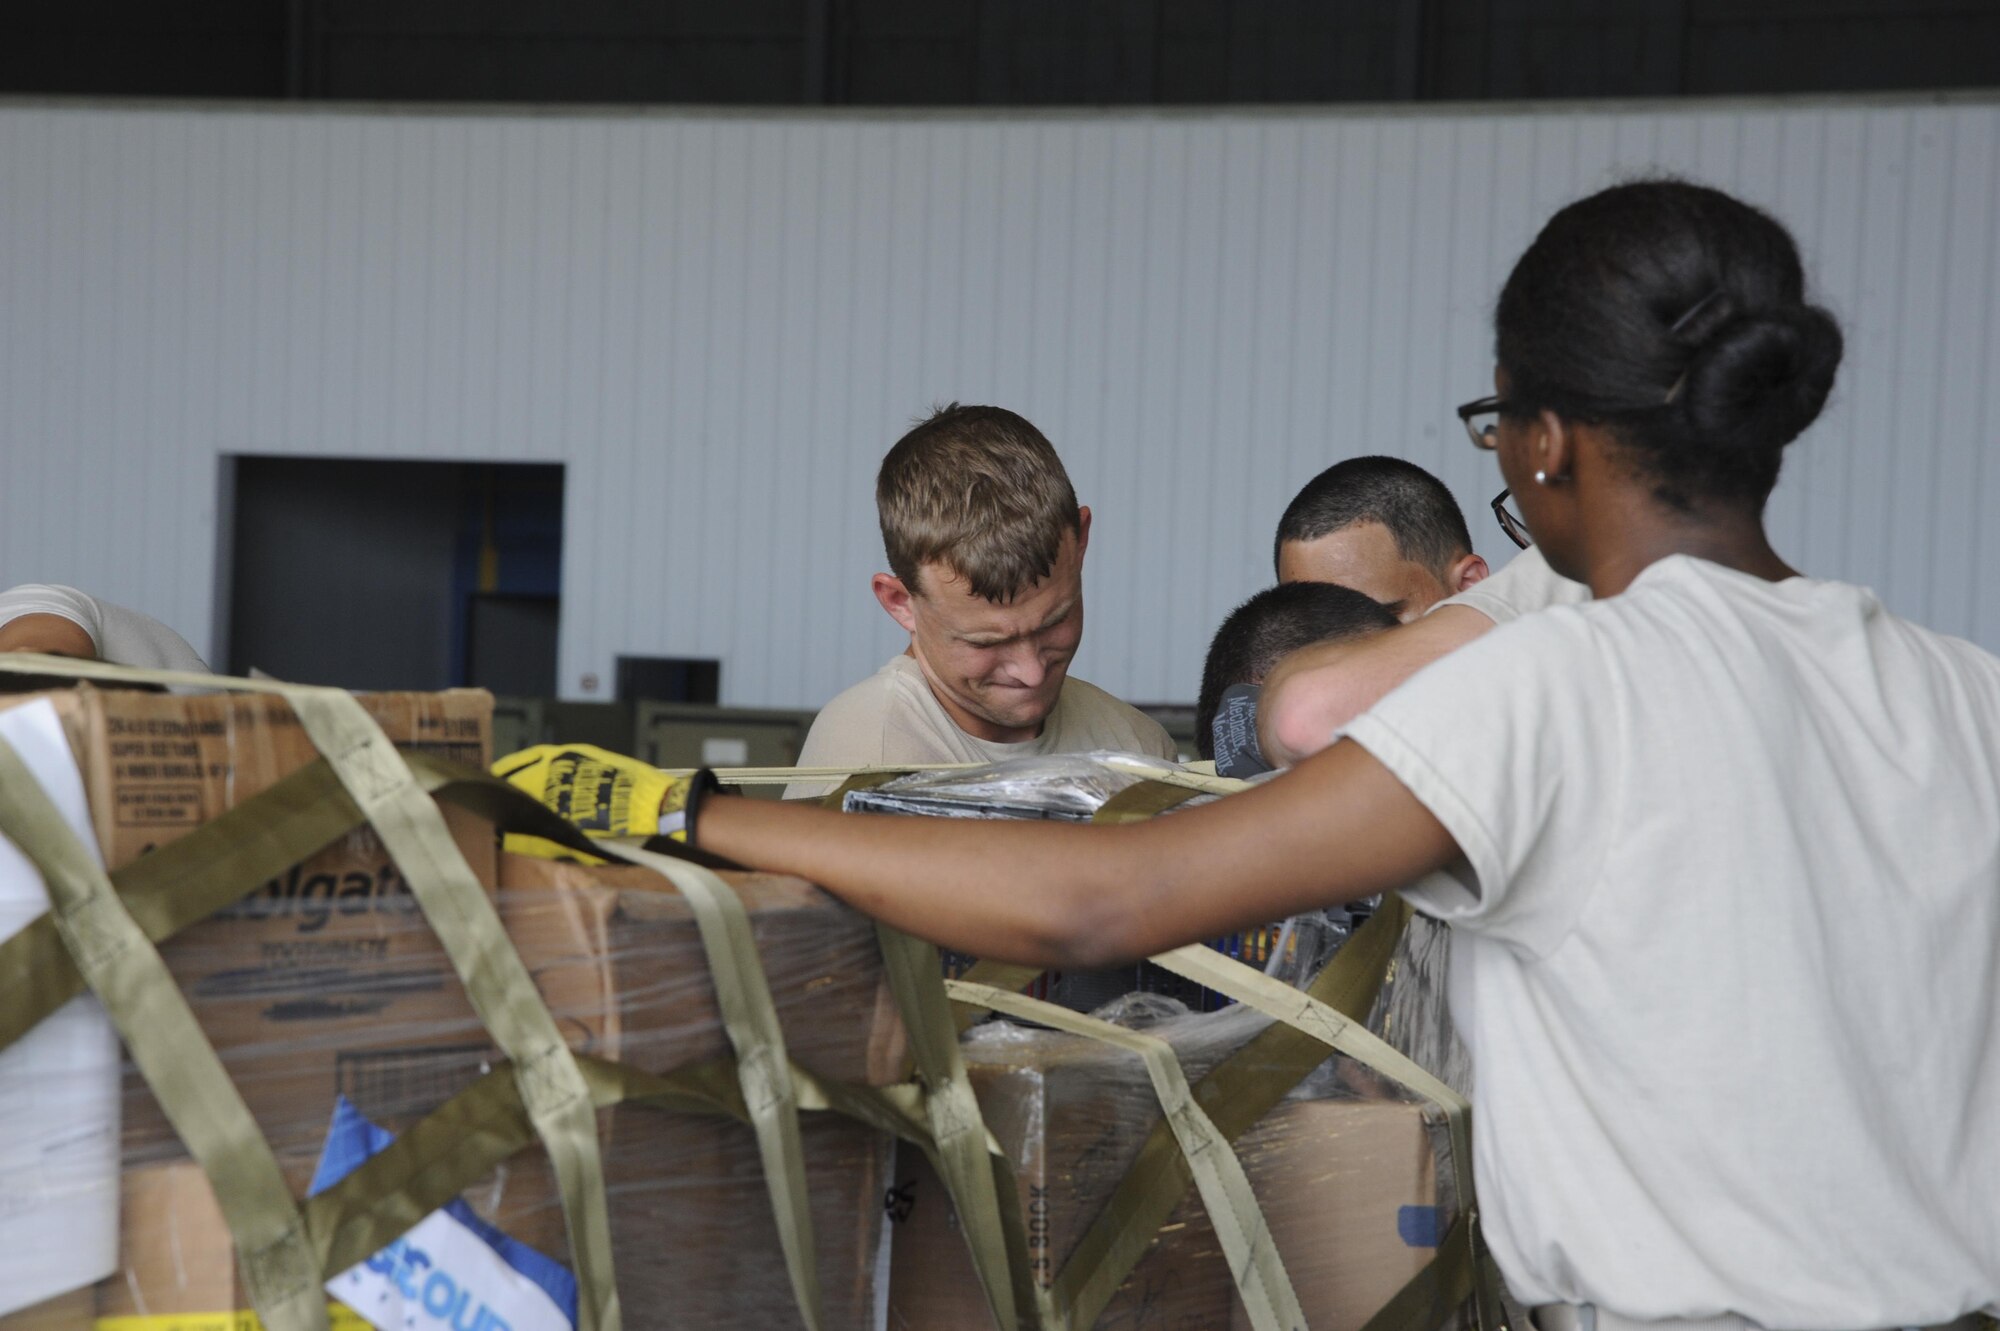 U.S. Air Force Airmen with the 6th Logistics Readiness Squadron (LRS) complete a pallet assembly for Hurricane Maria relief efforts at MacDill Air Force Base, Fla., Oct. 4, 2017.